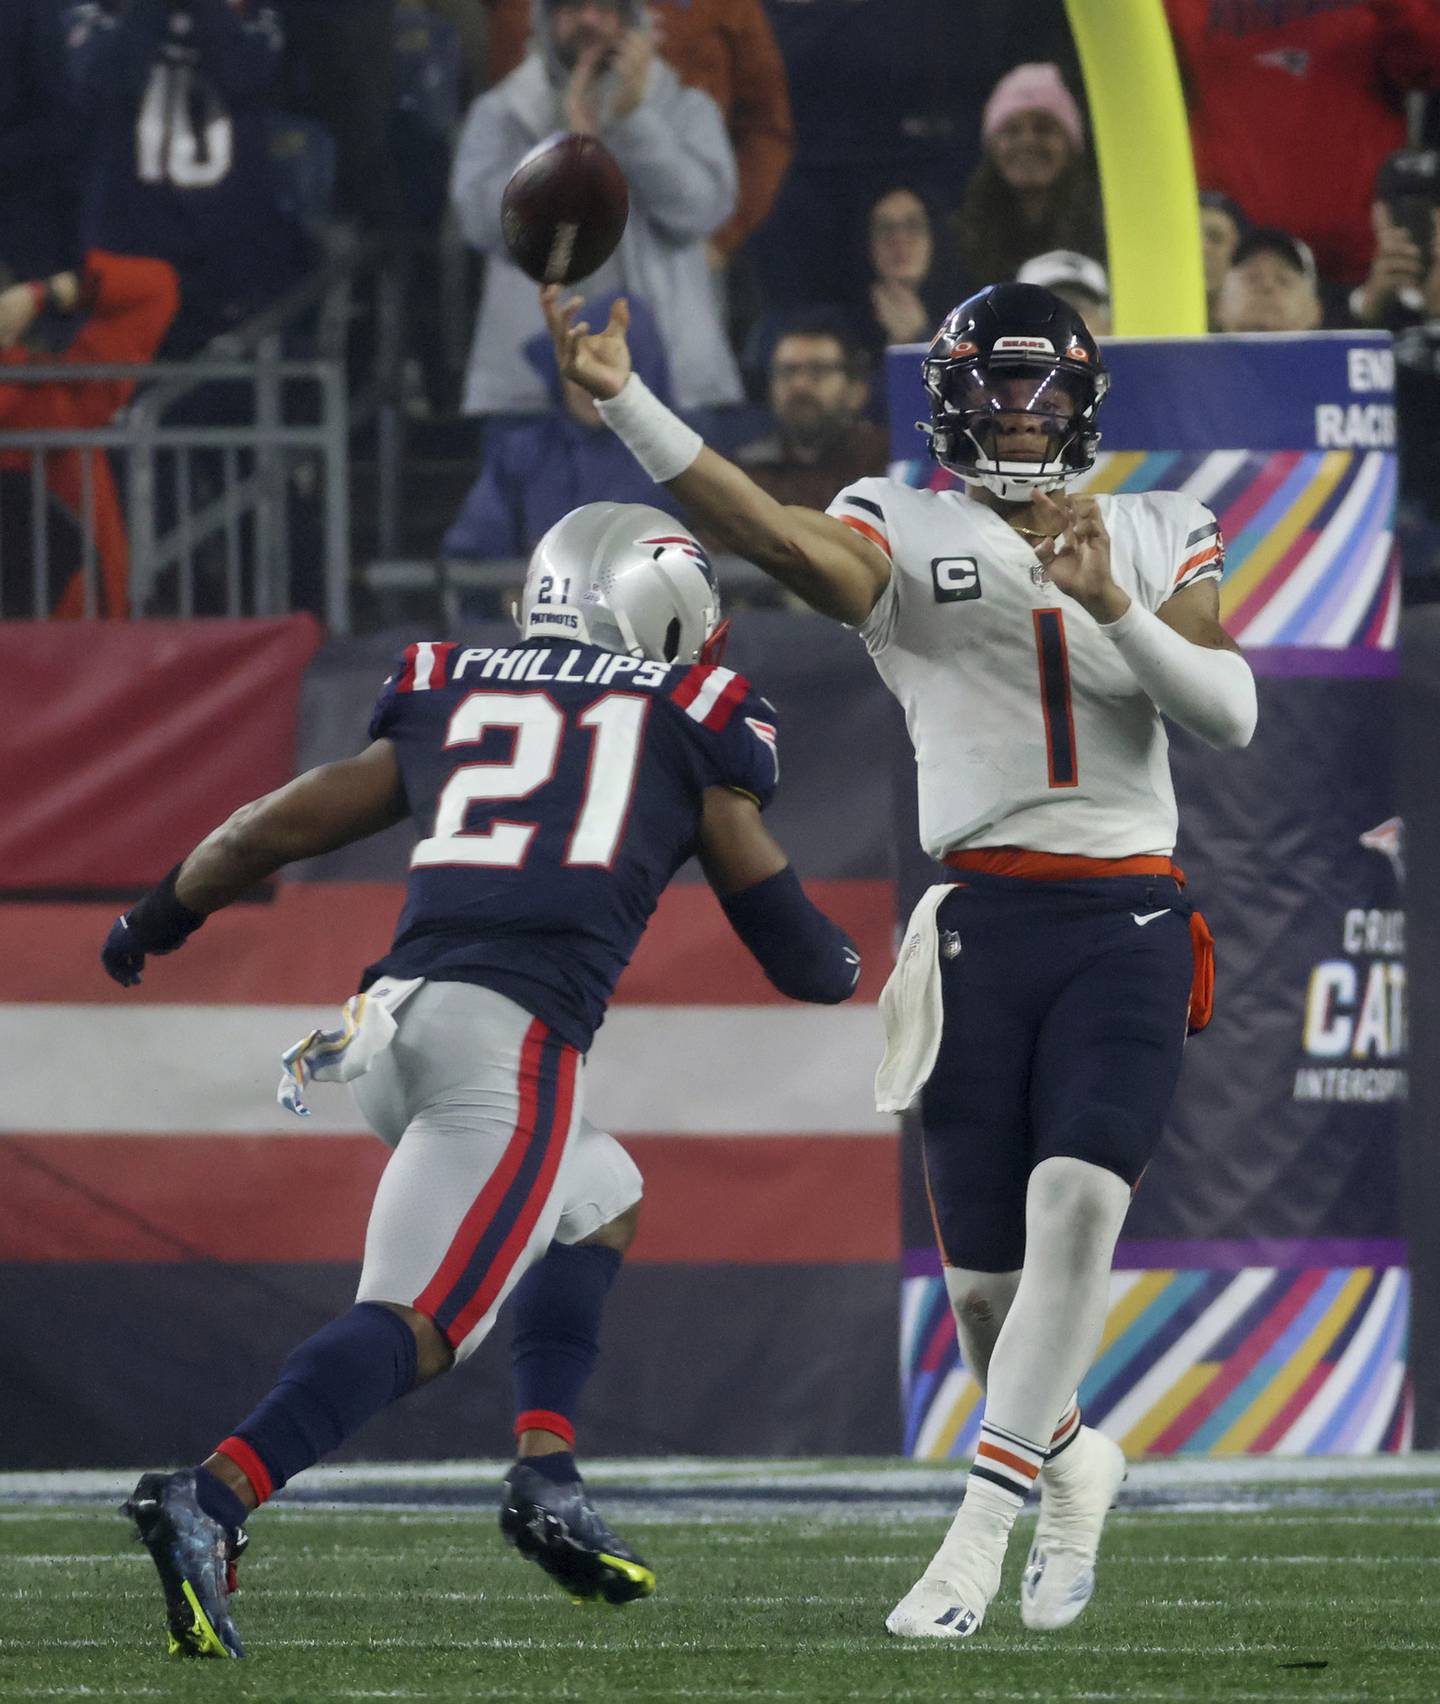 Bears quarterback Justin Fields releases the ball as Patriots safety Adrian Phillips) approaches in the third quarter at Gillette Stadium on Oct. 24, 2022.